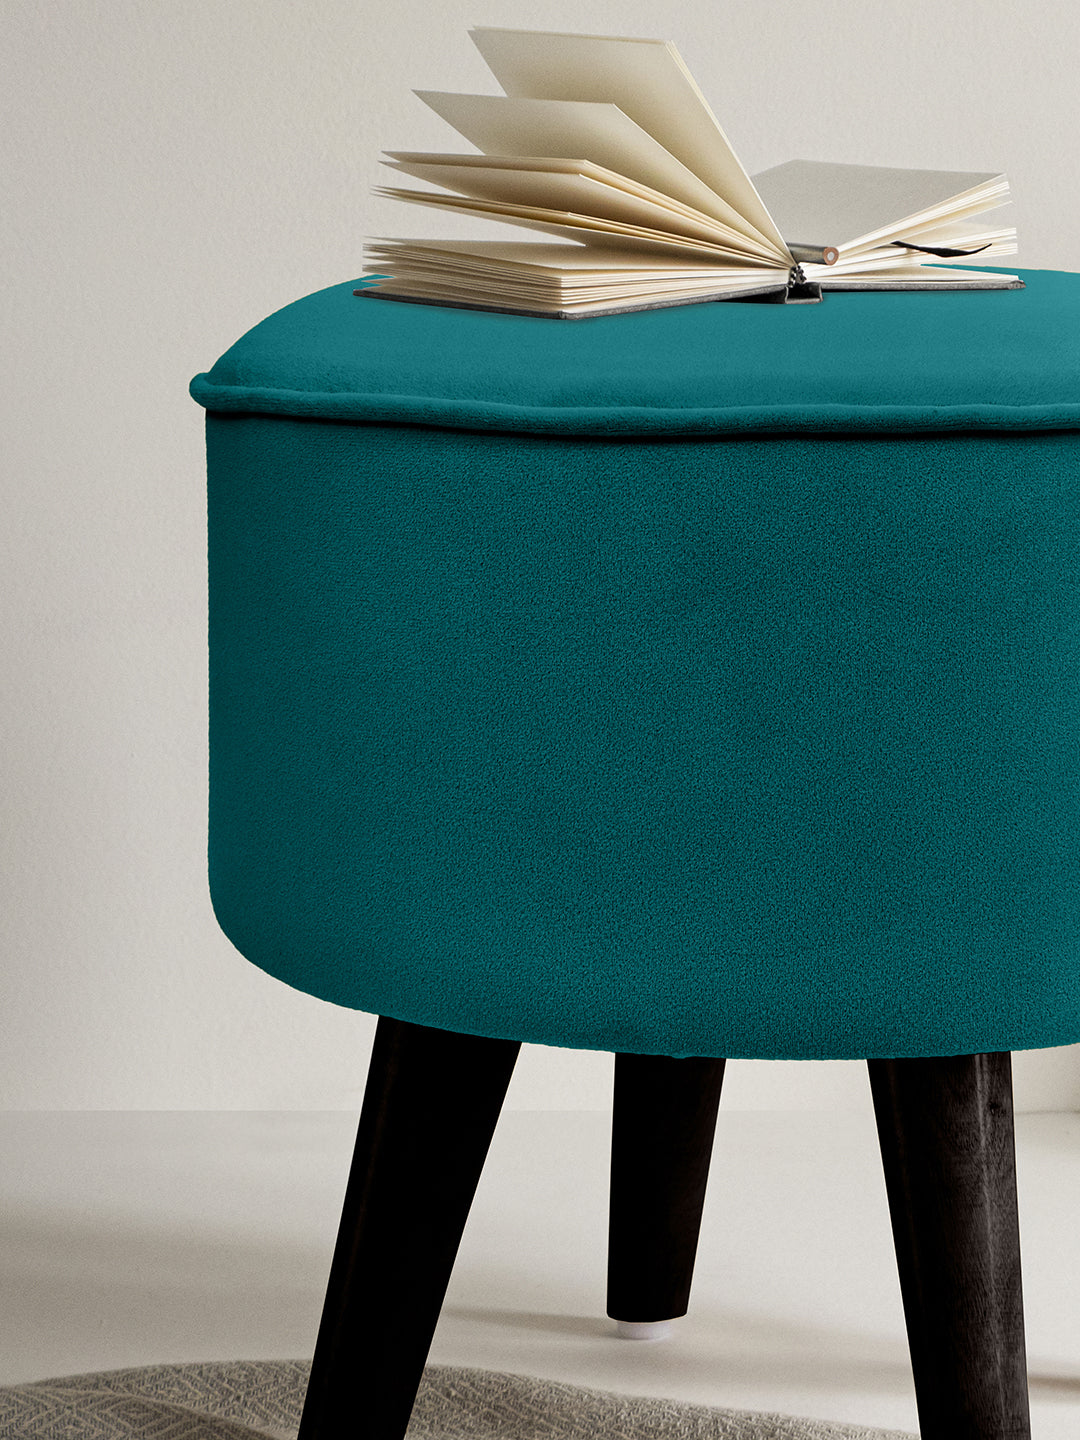 Teal Ottoman With Wooden Legs